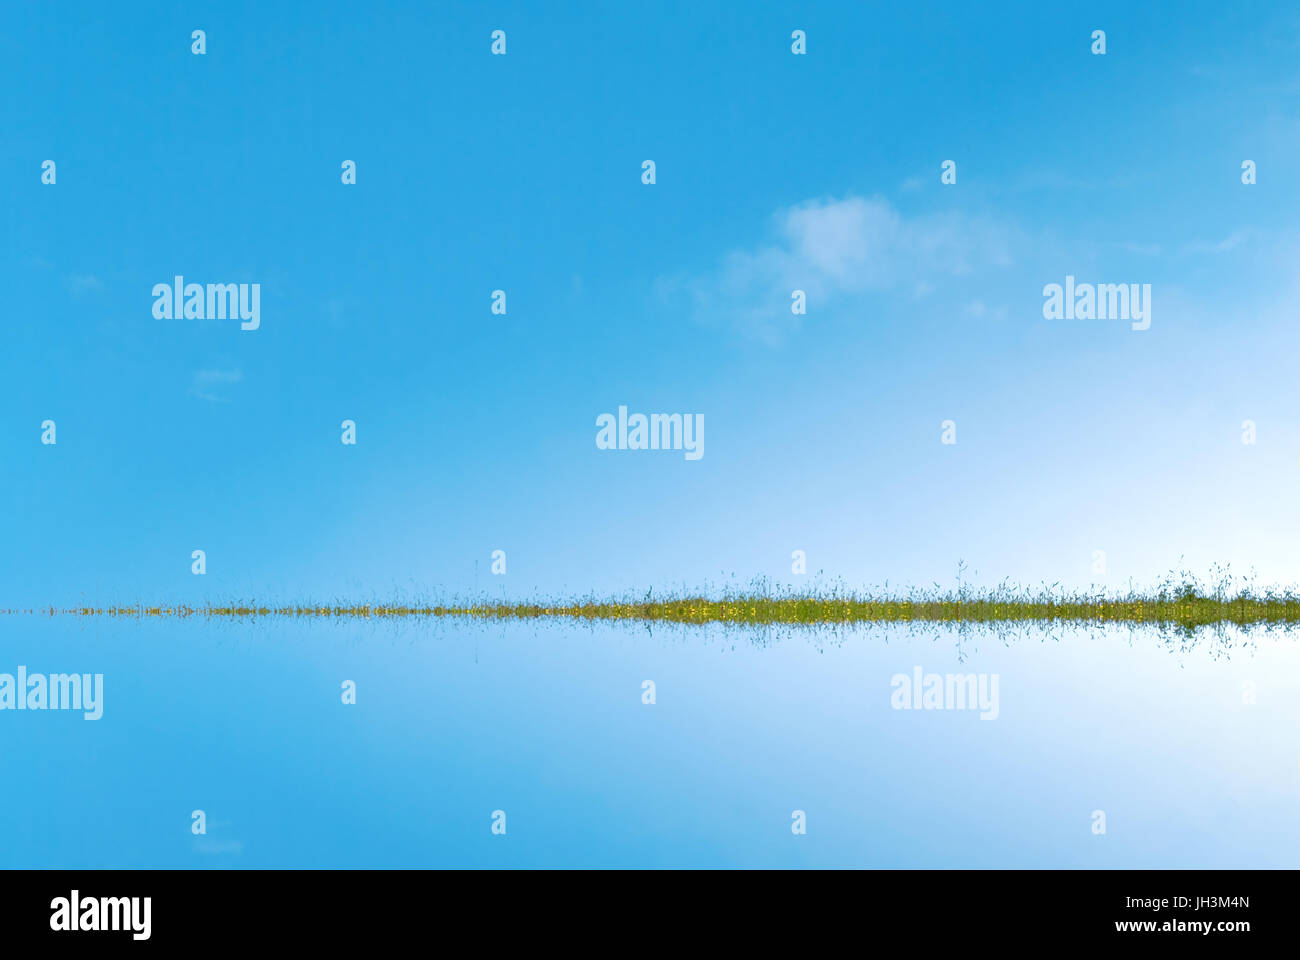 Background image of a blue sky reflected in water (artificial), divided by grassy green strip of land, sprinkled with yellow buttercups. Stock Photo